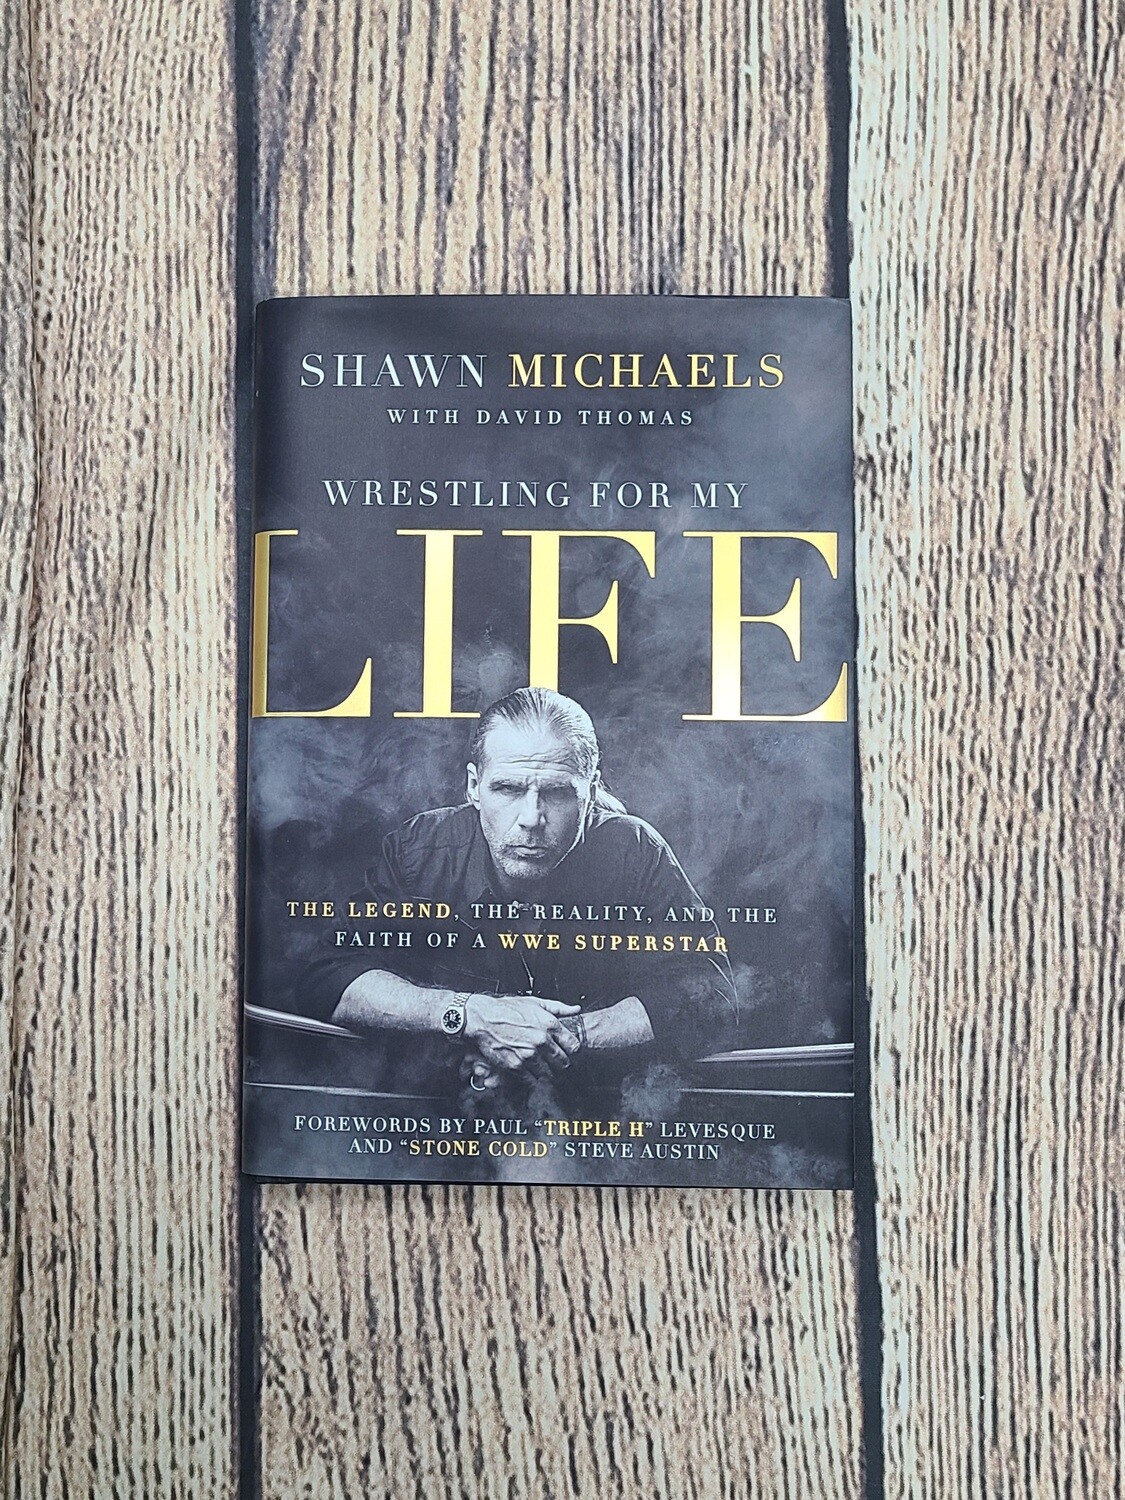 Wrestling for my Life by Shawn Michaels with David Thomas